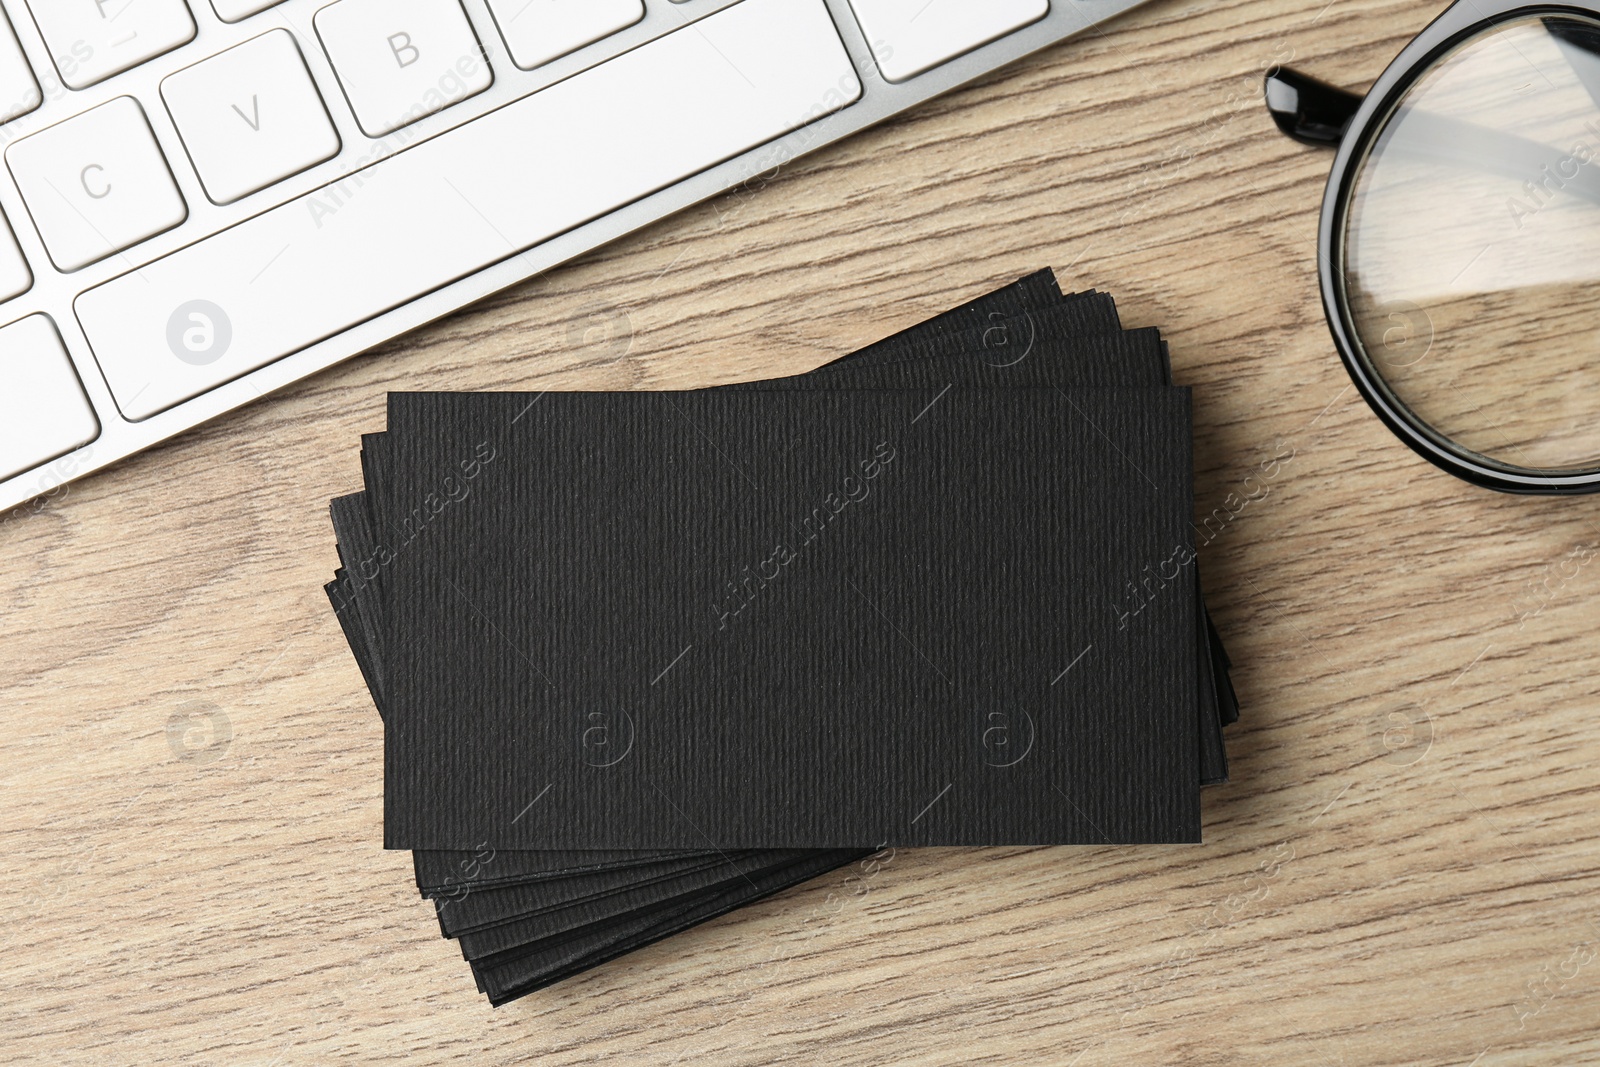 Photo of Blank black business cards, computer keyboard and glasses on wooden table, flat lay. Mockup for design